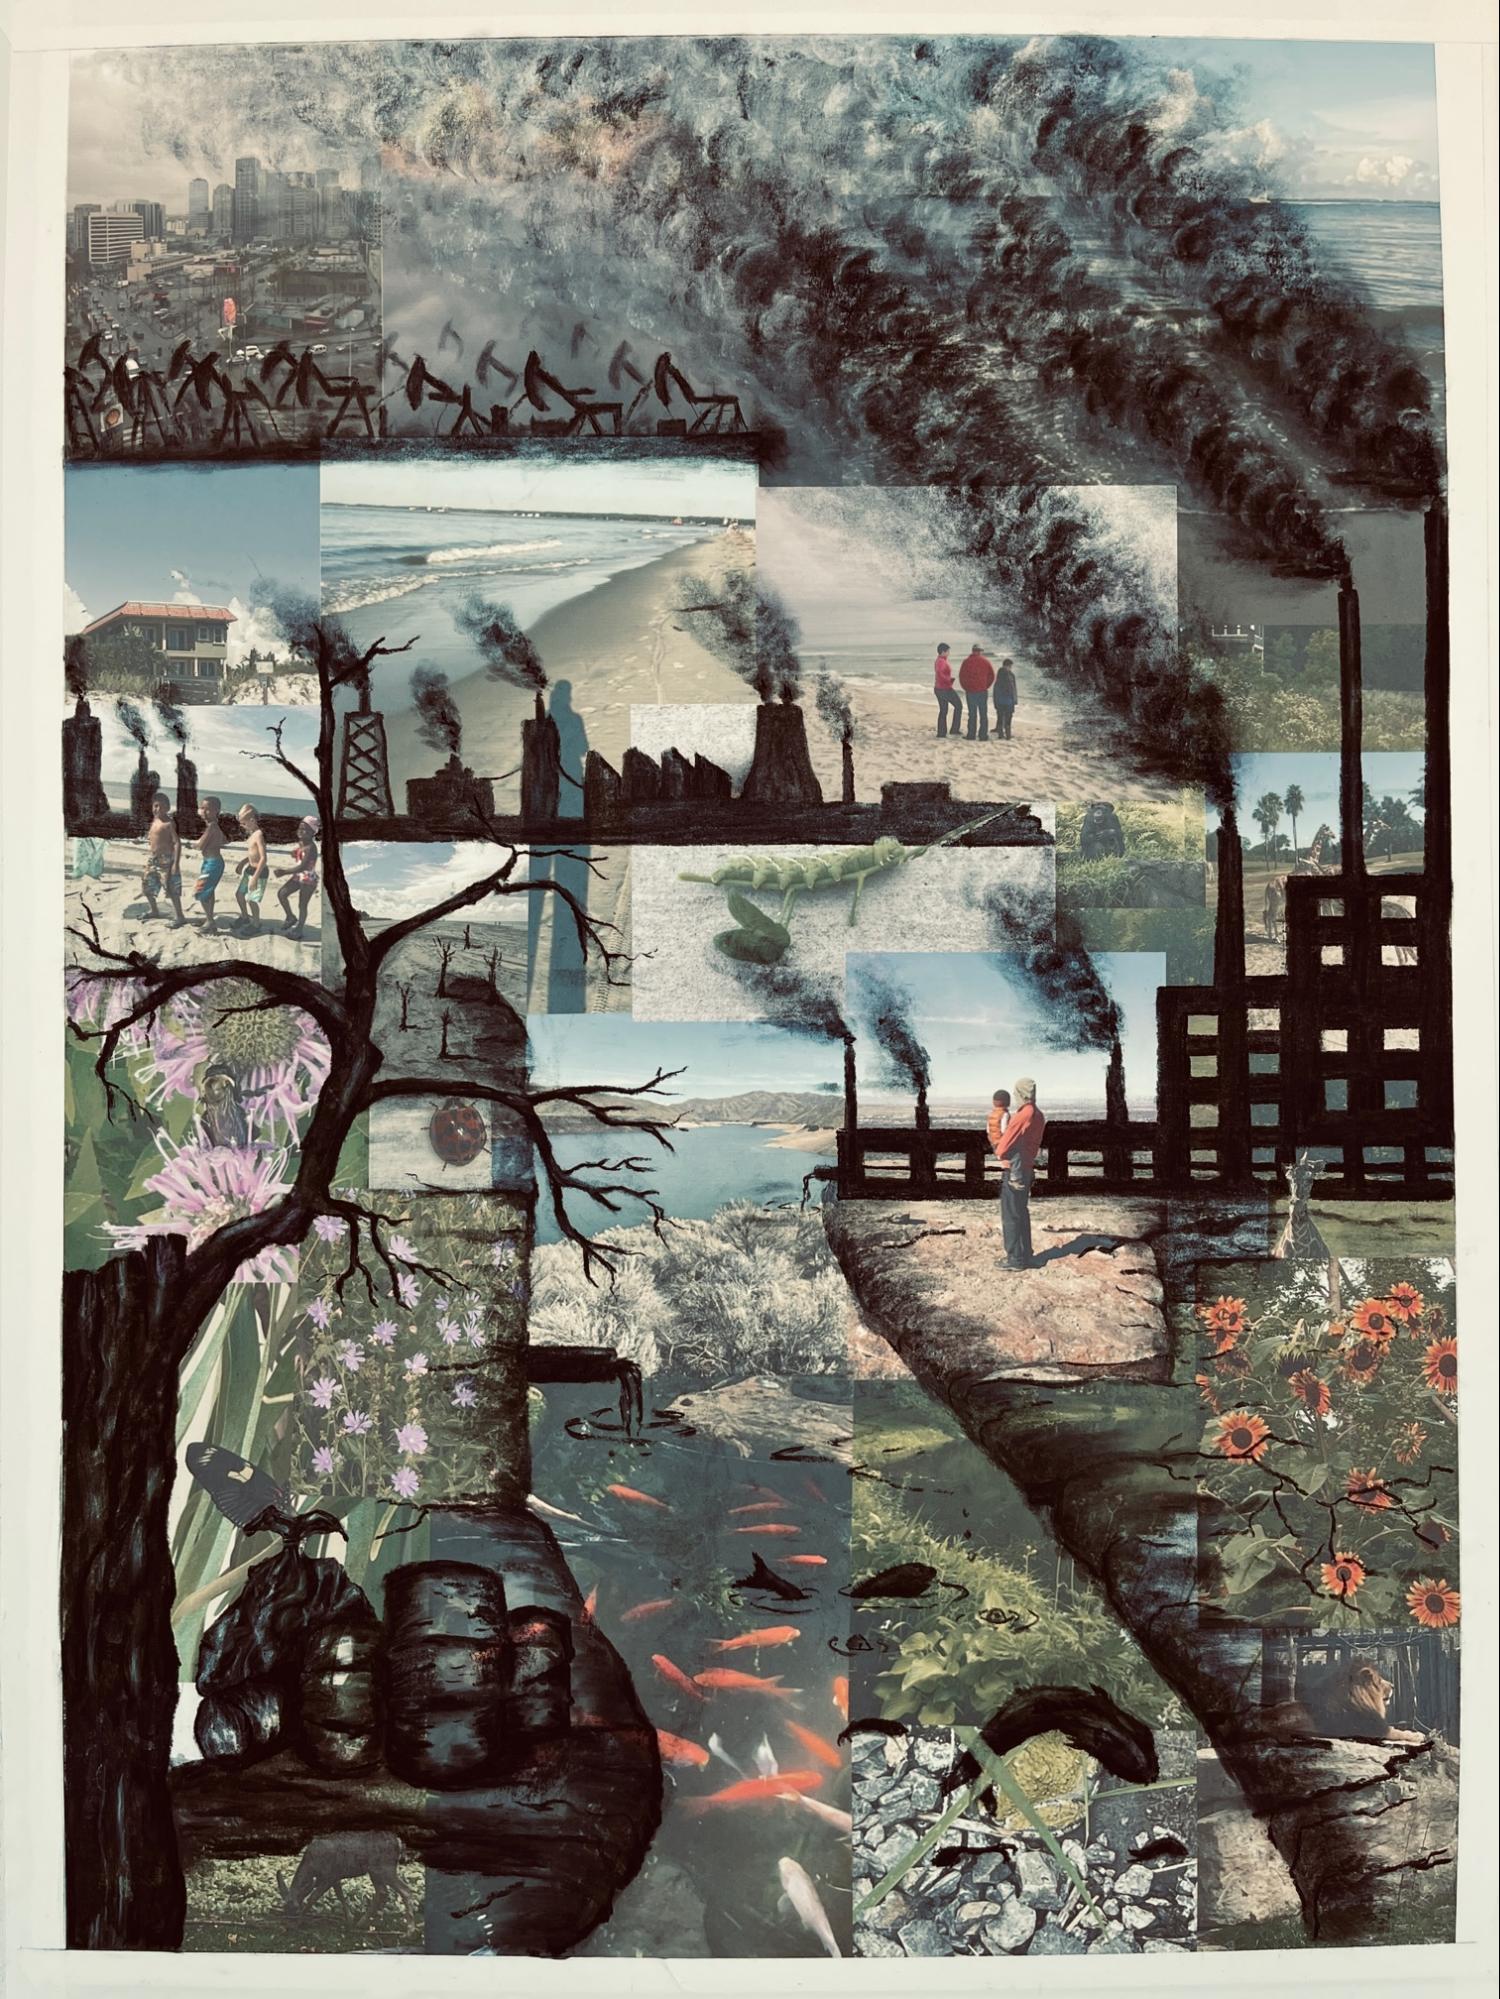 Art image from the student's poster